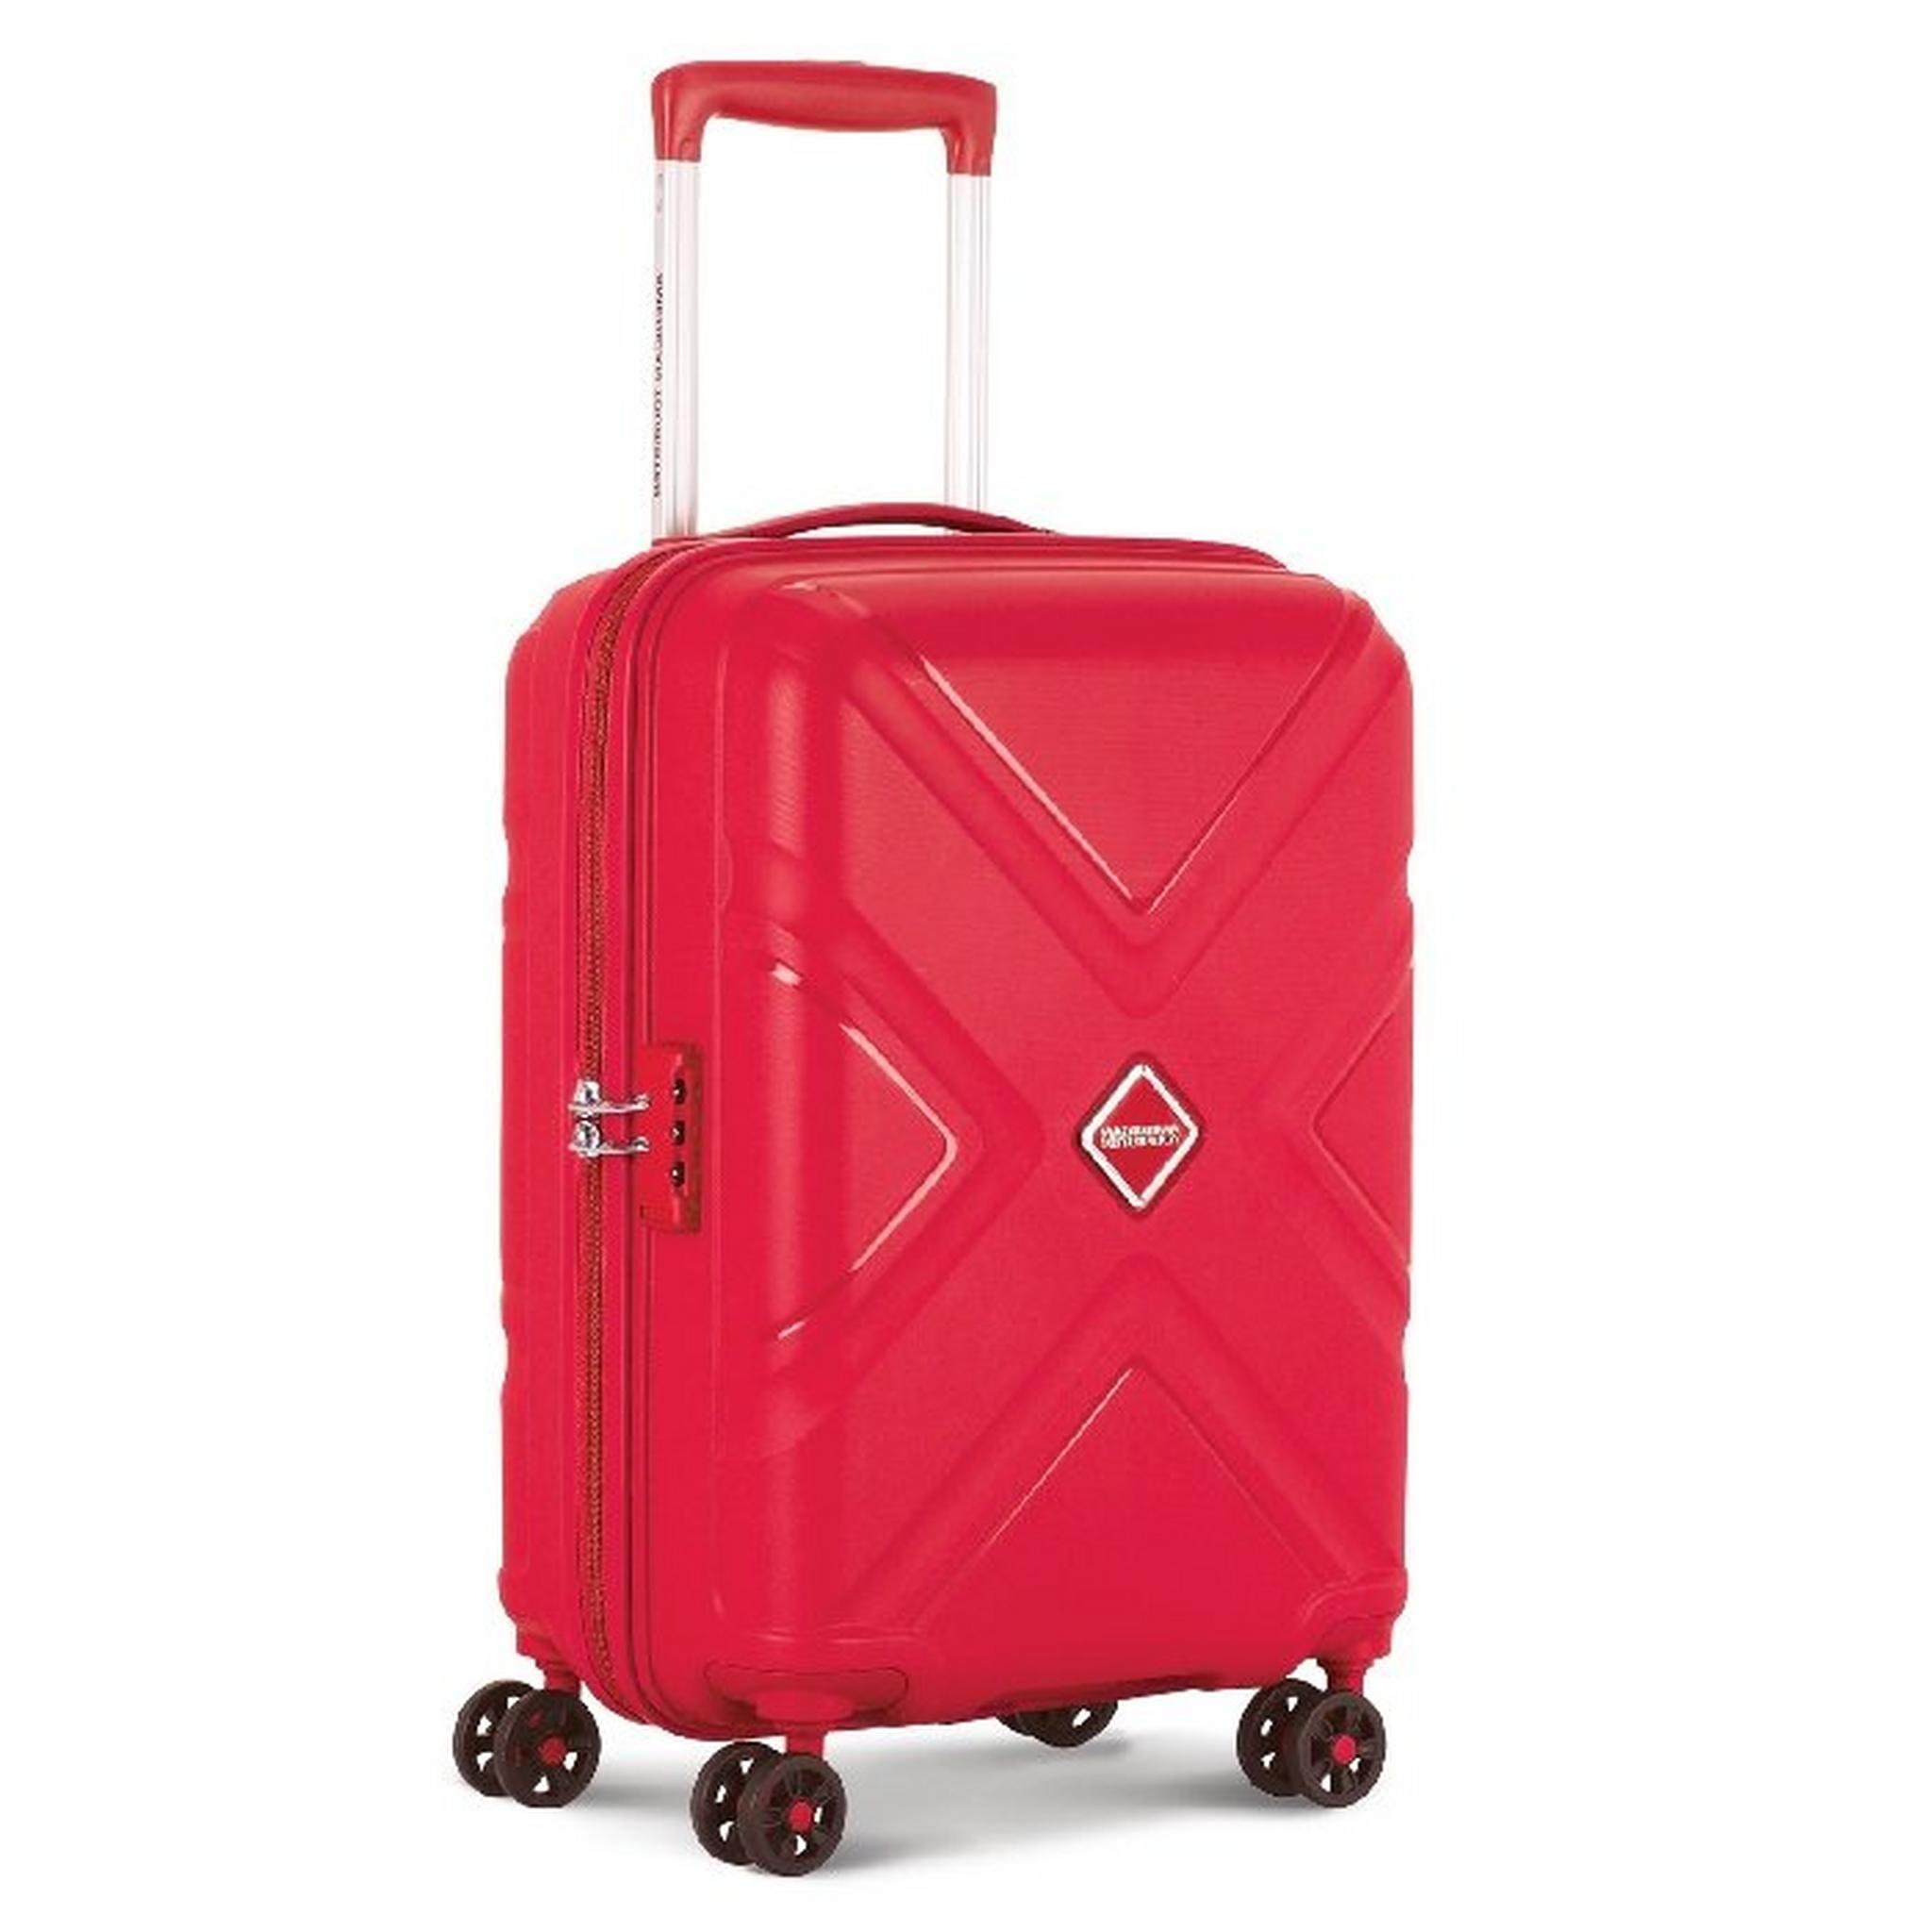 American Tourister Kross Hard Spinner 55cm Luggage - Red